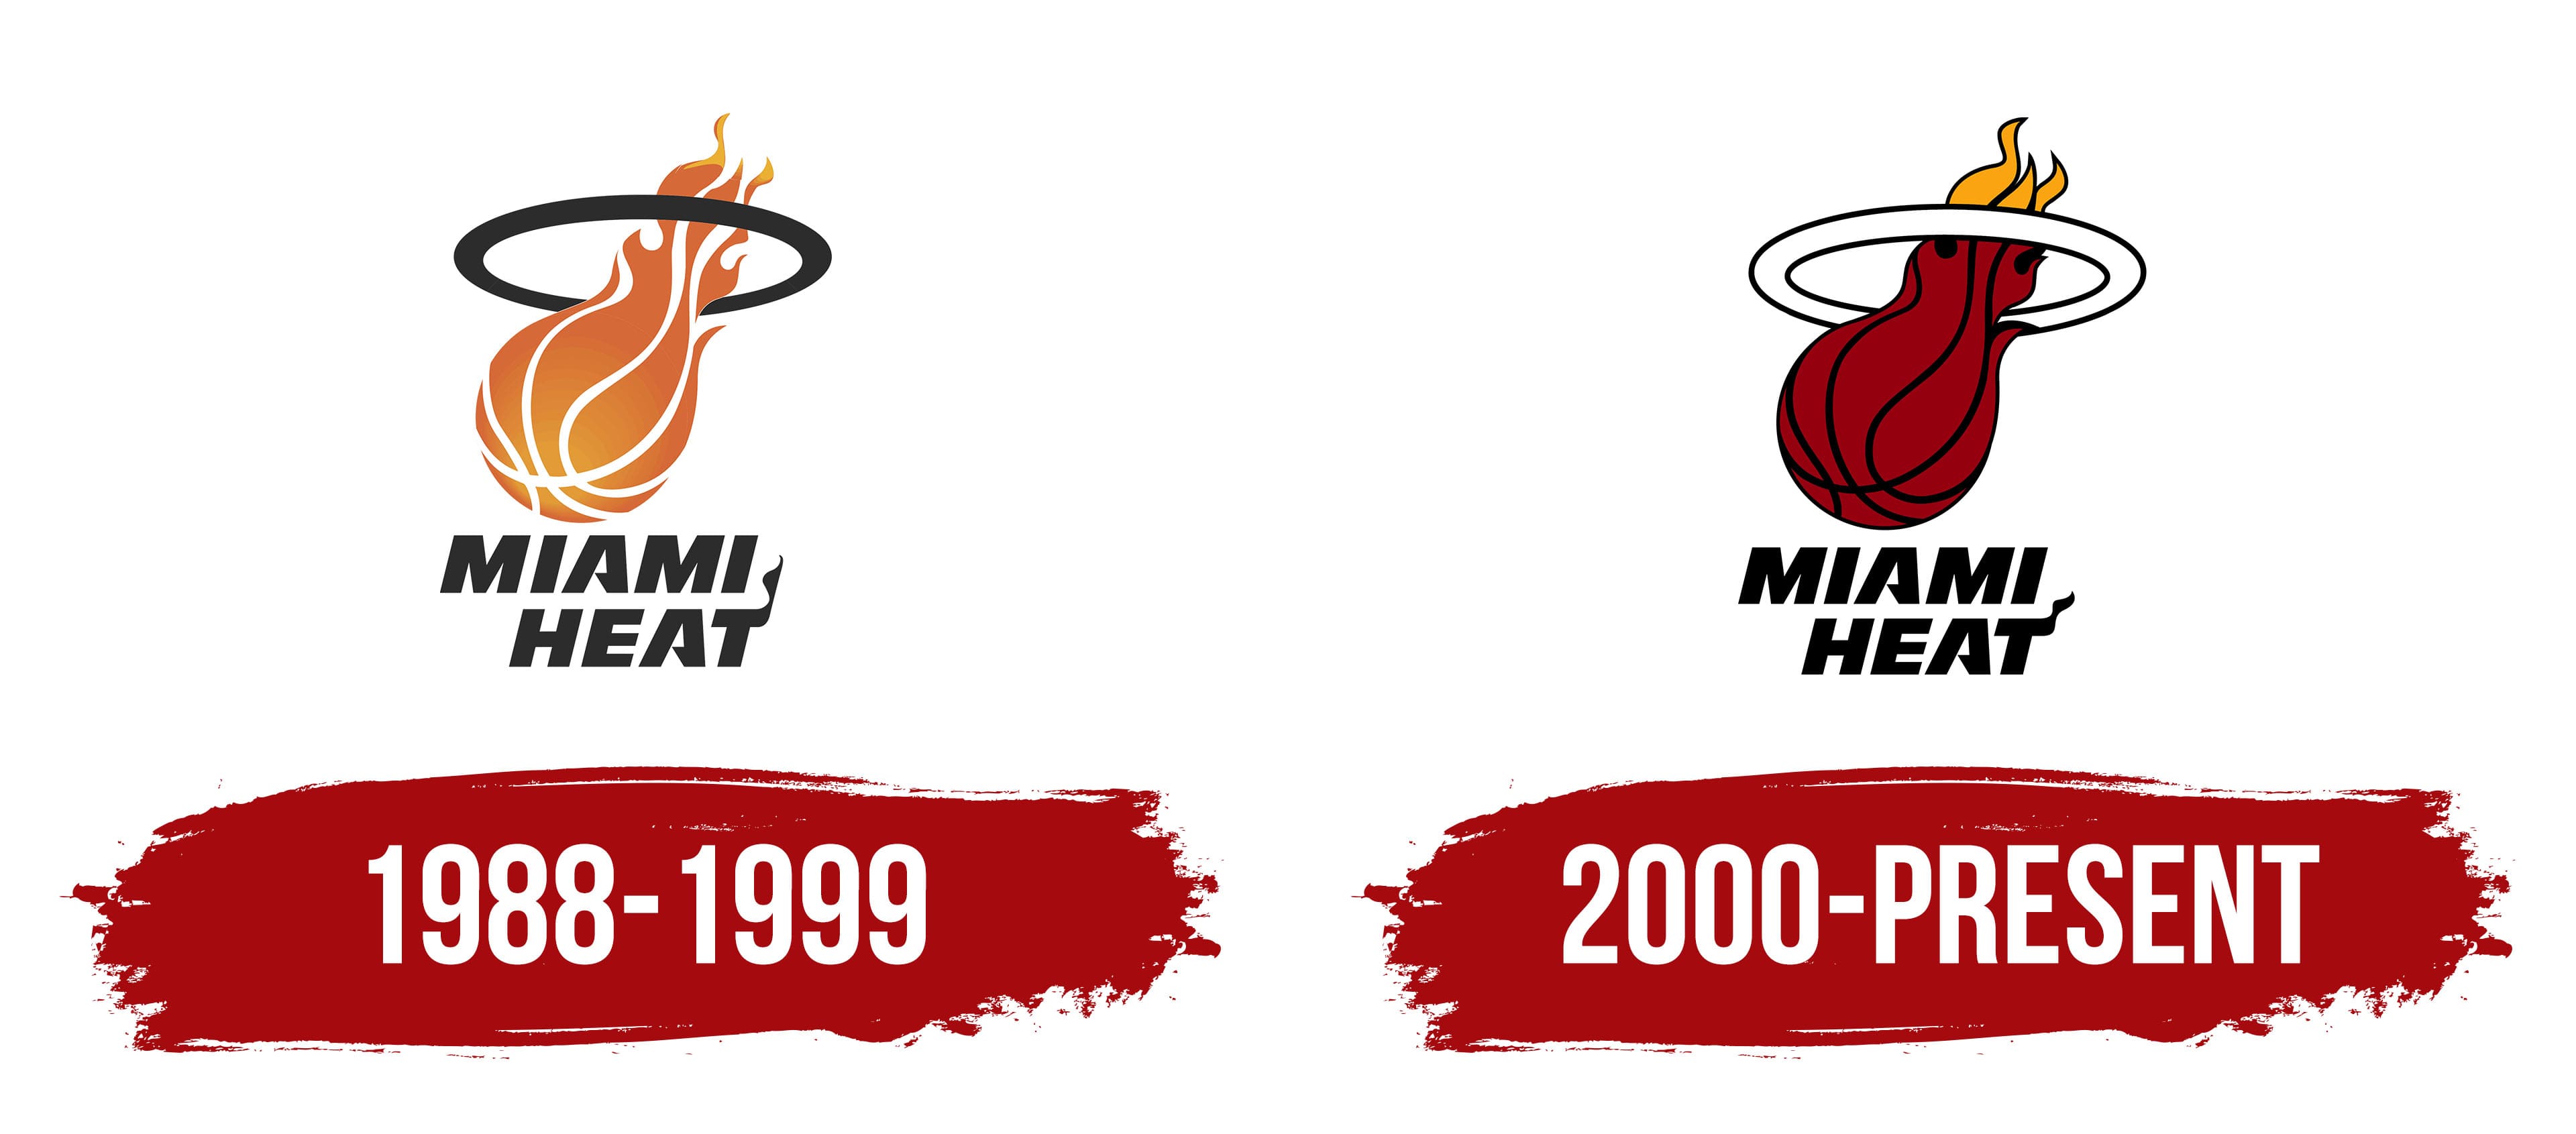 Miami Heat Color Codes Hex, RGB, And CMYK Team Color Codes | vlr.eng.br